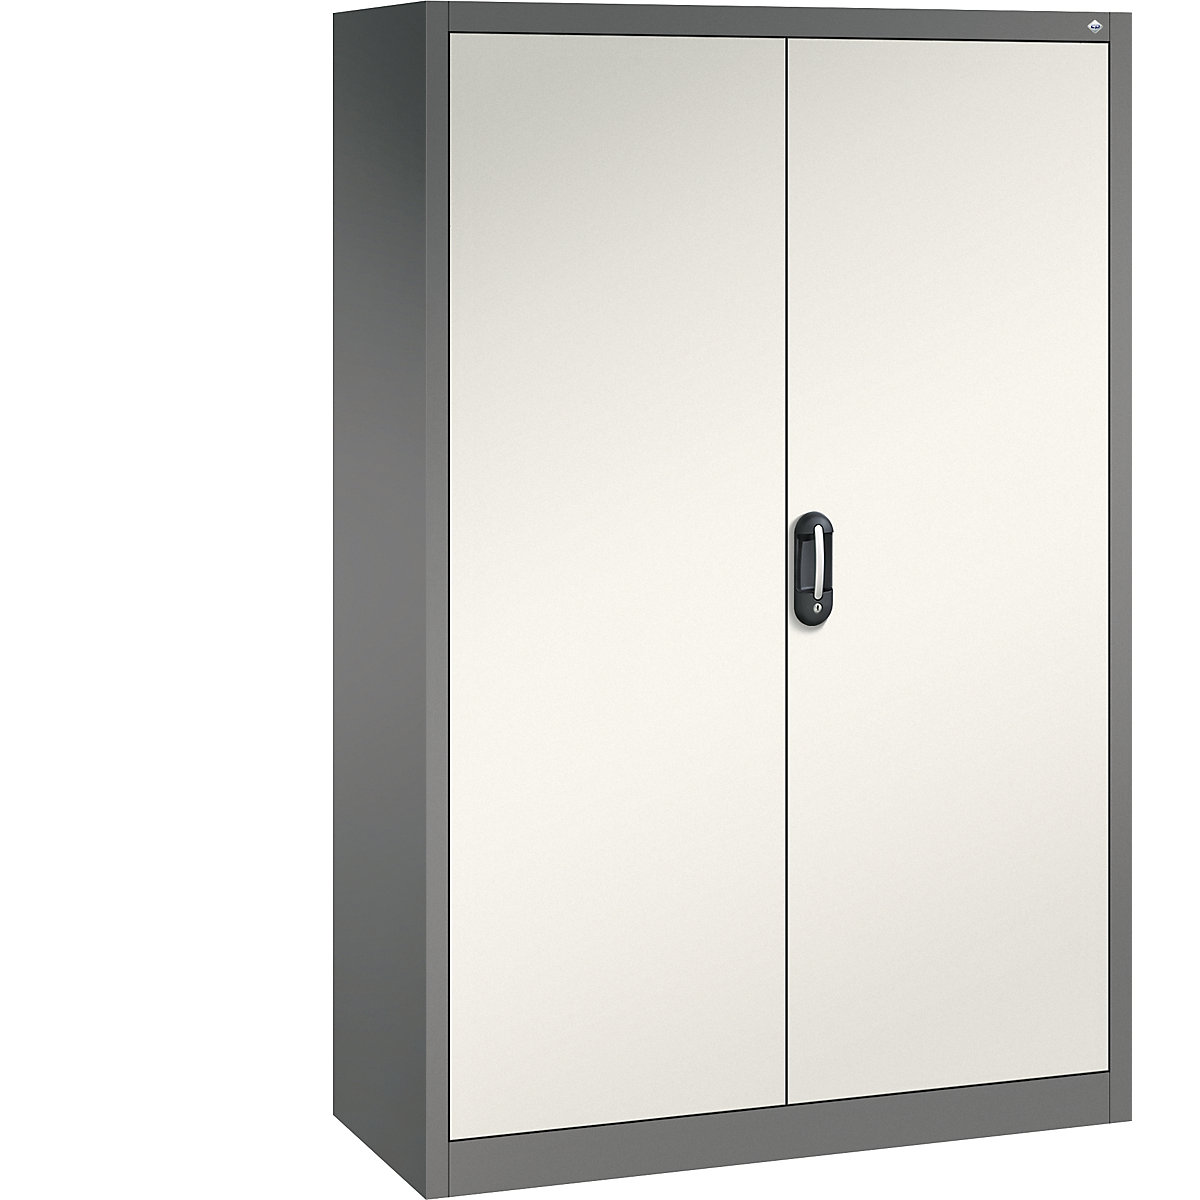 ACURADO universal cupboard – C+P, WxD 1200 x 500 mm, volcanic grey / oyster white-29